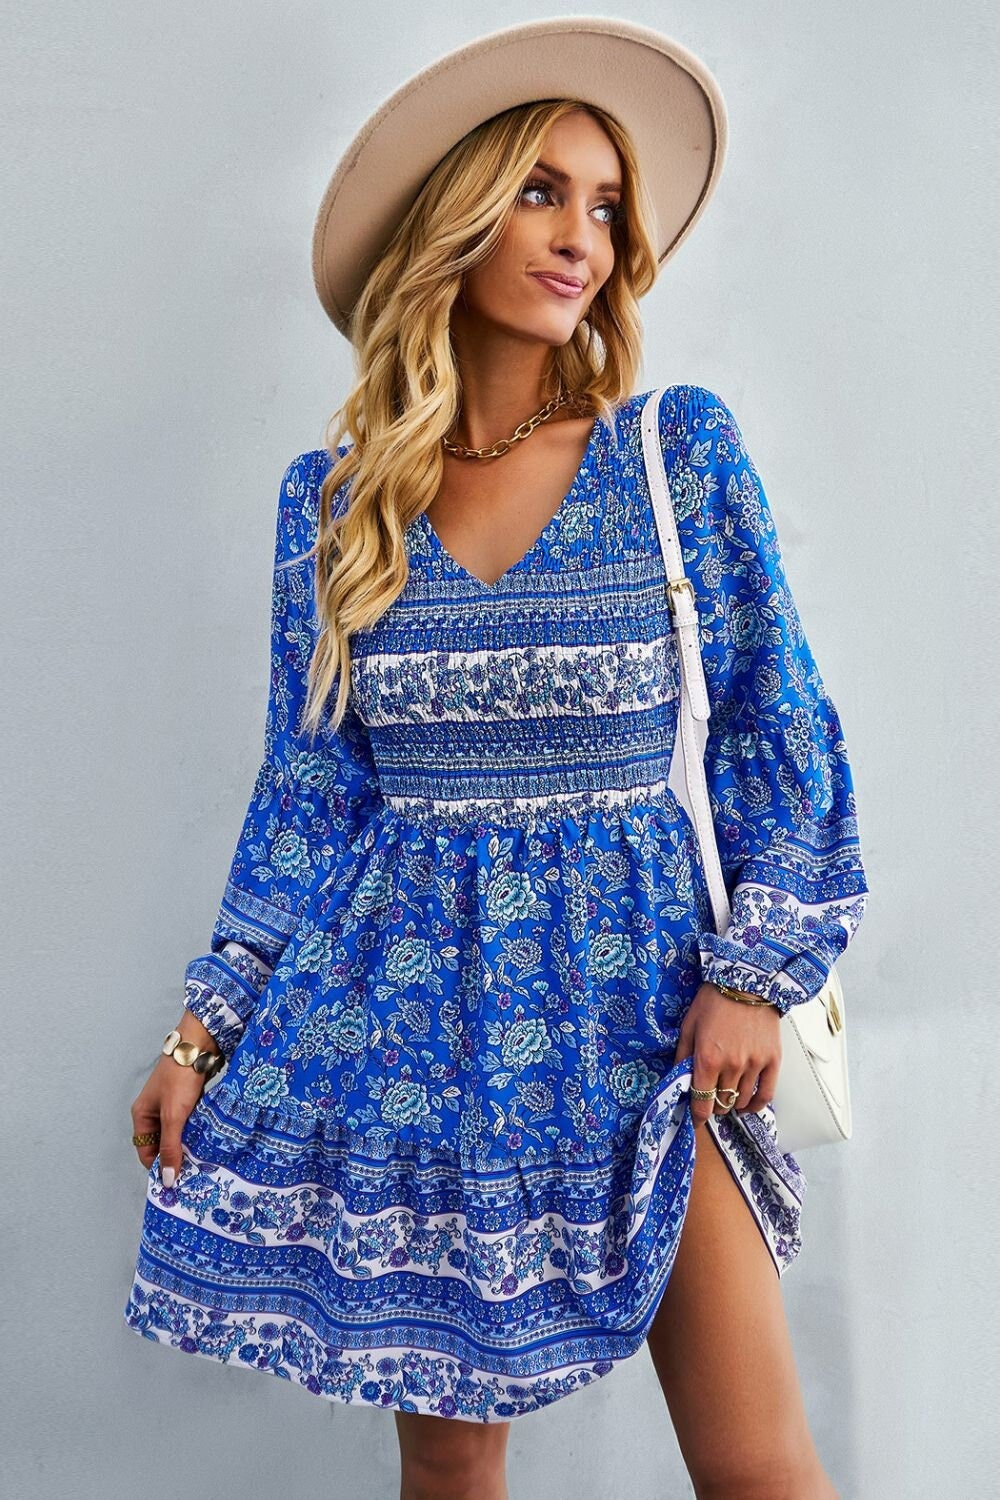 blue and white summer dress